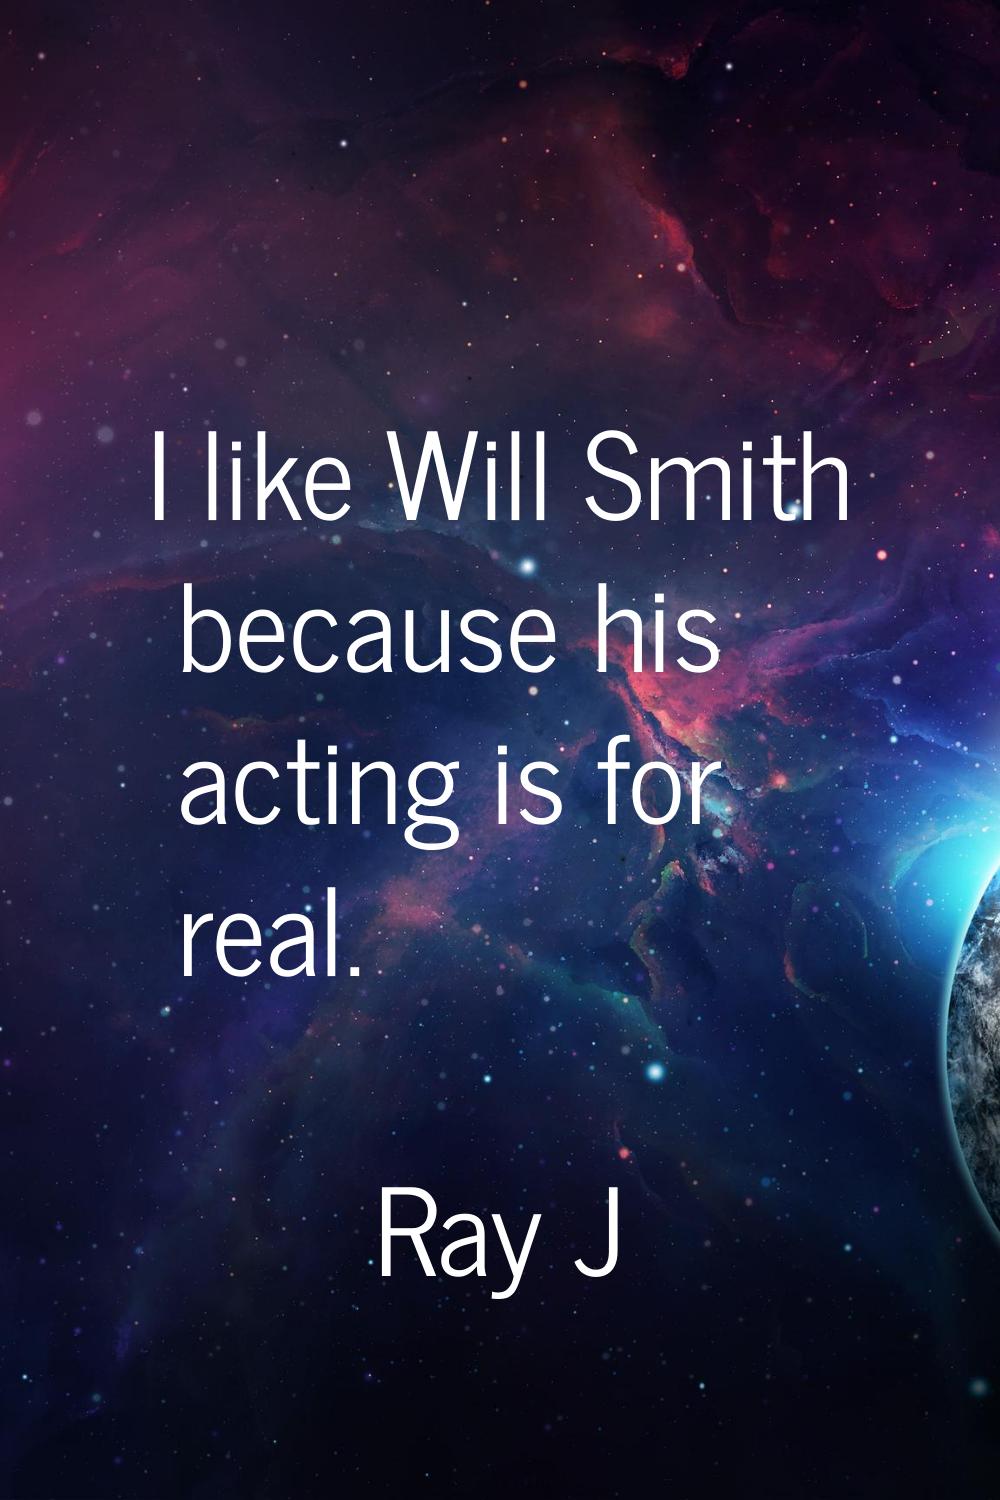 I like Will Smith because his acting is for real.